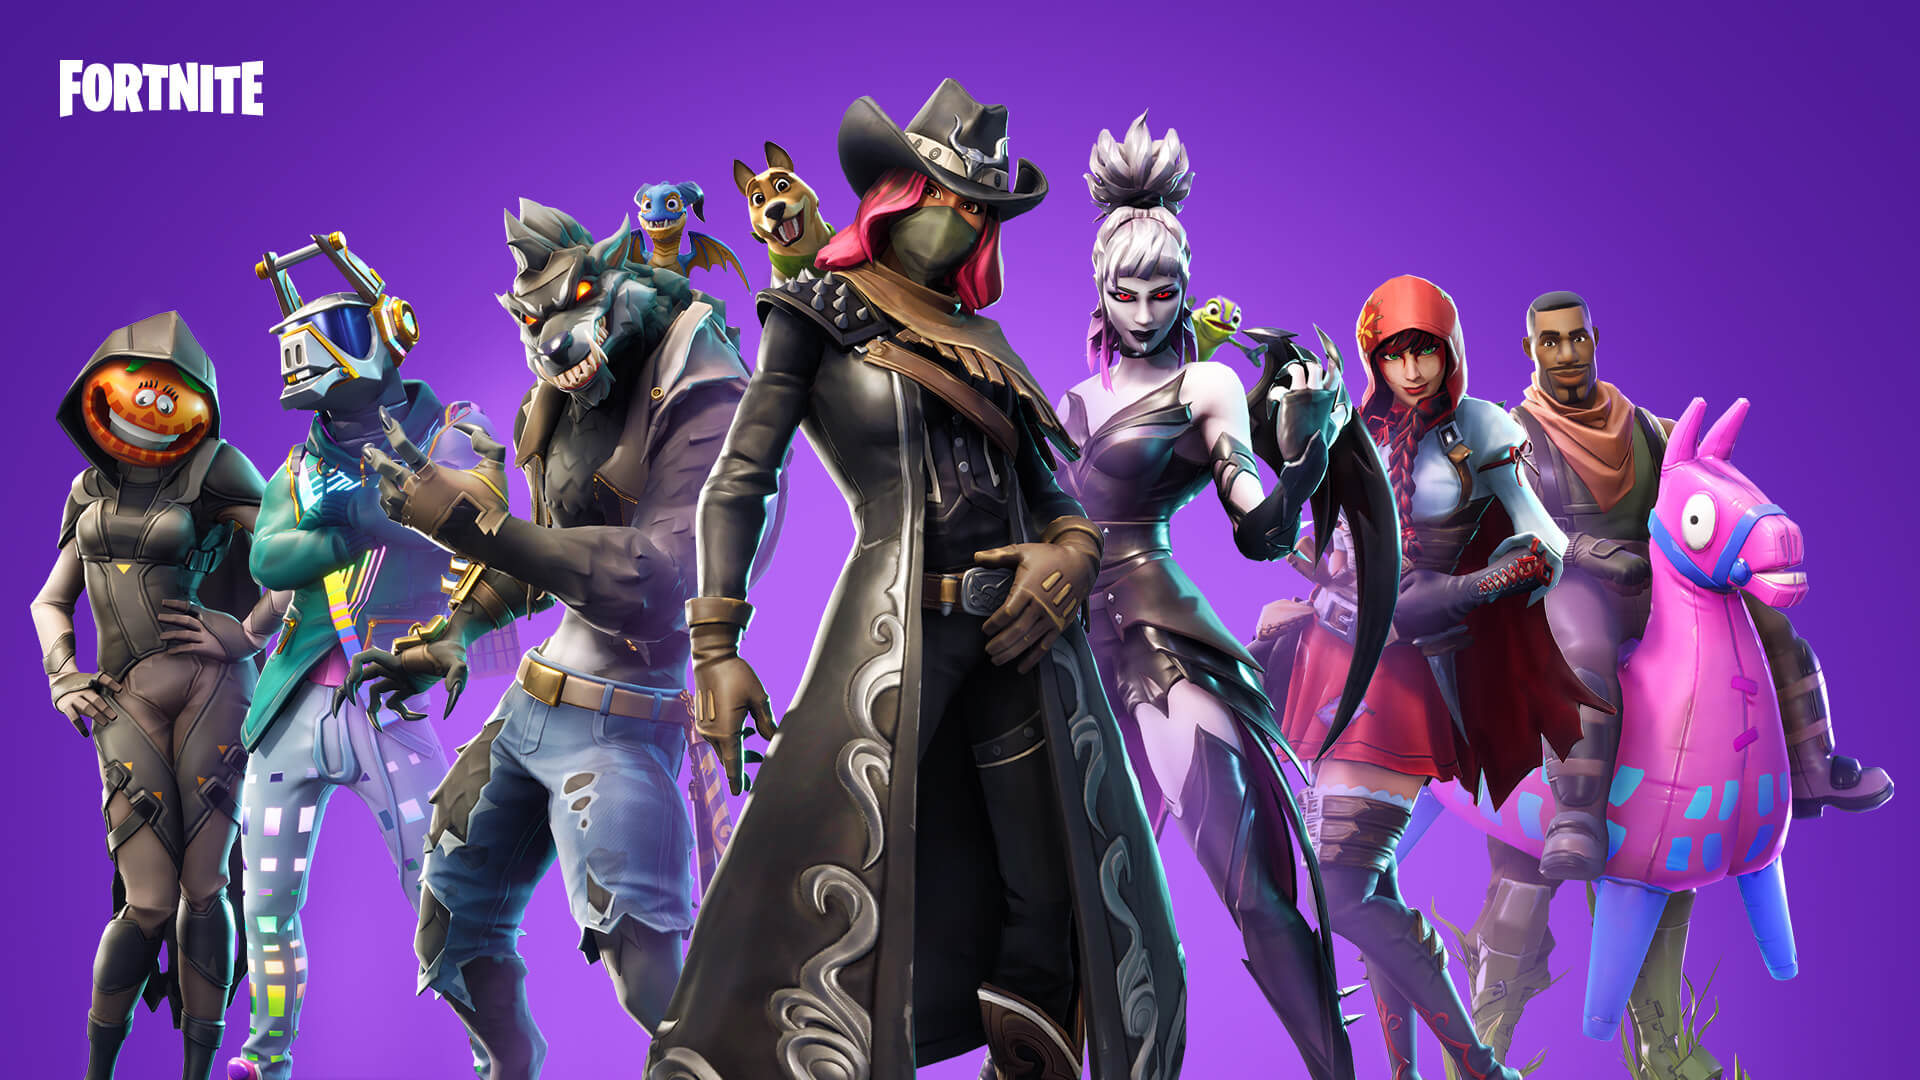 Fortnite Fans Using Giddy Up And Standard Skins Surprised A